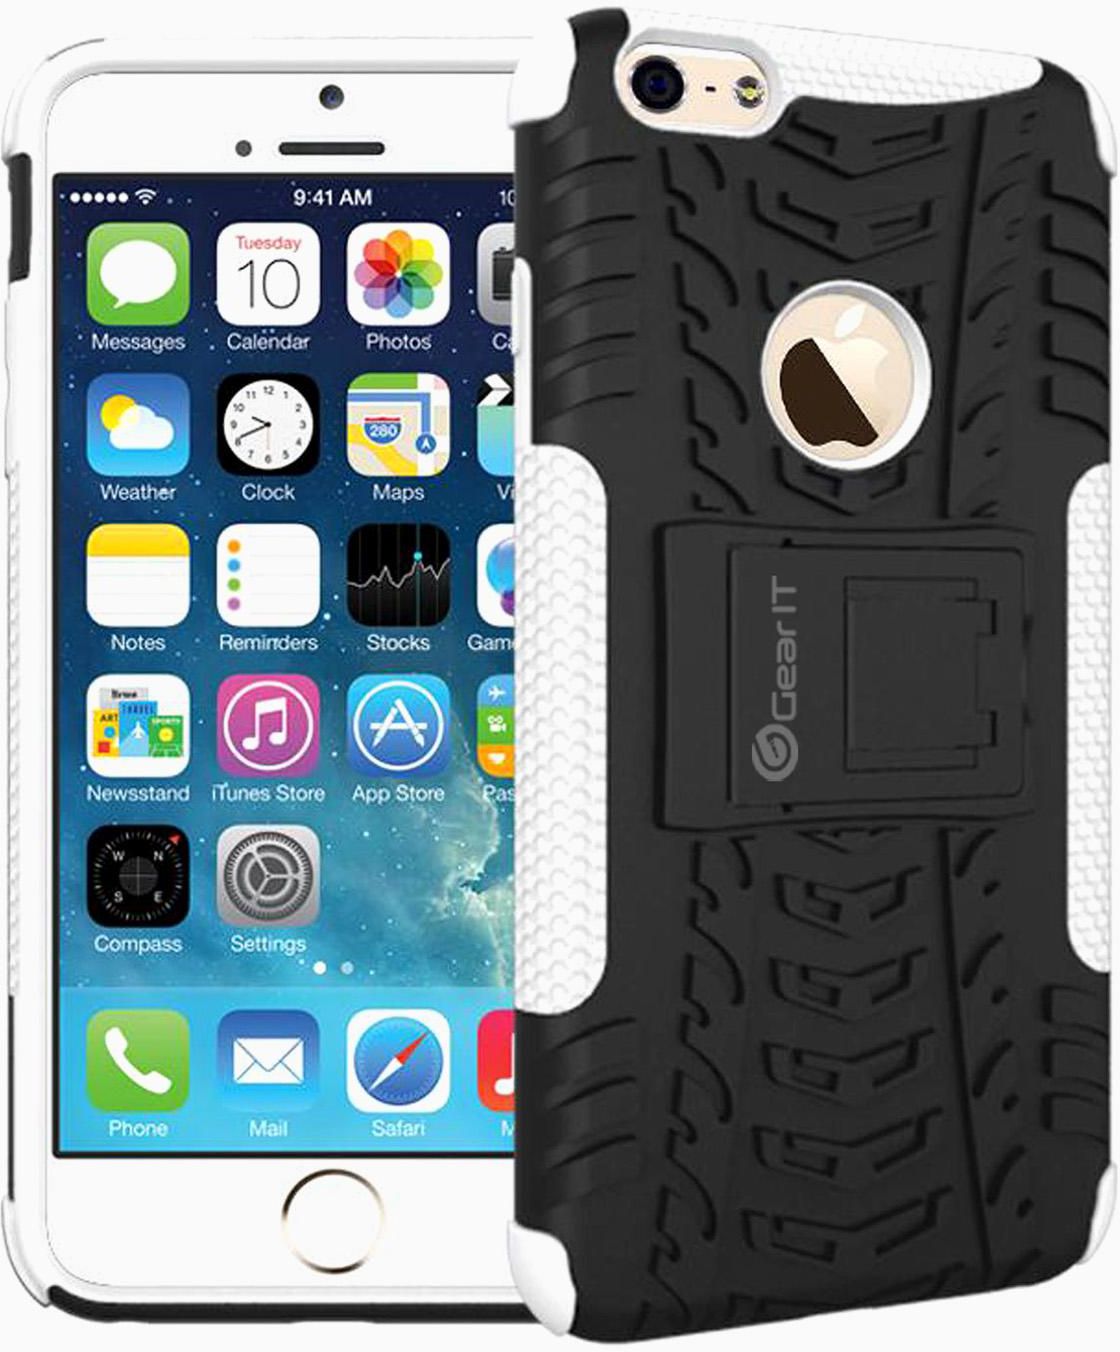 rooCASE GearIt Trac Series Hybrid Rugged Tough Armor with Kickstand Case Cover for Apple iPhone 6 4.7-inch